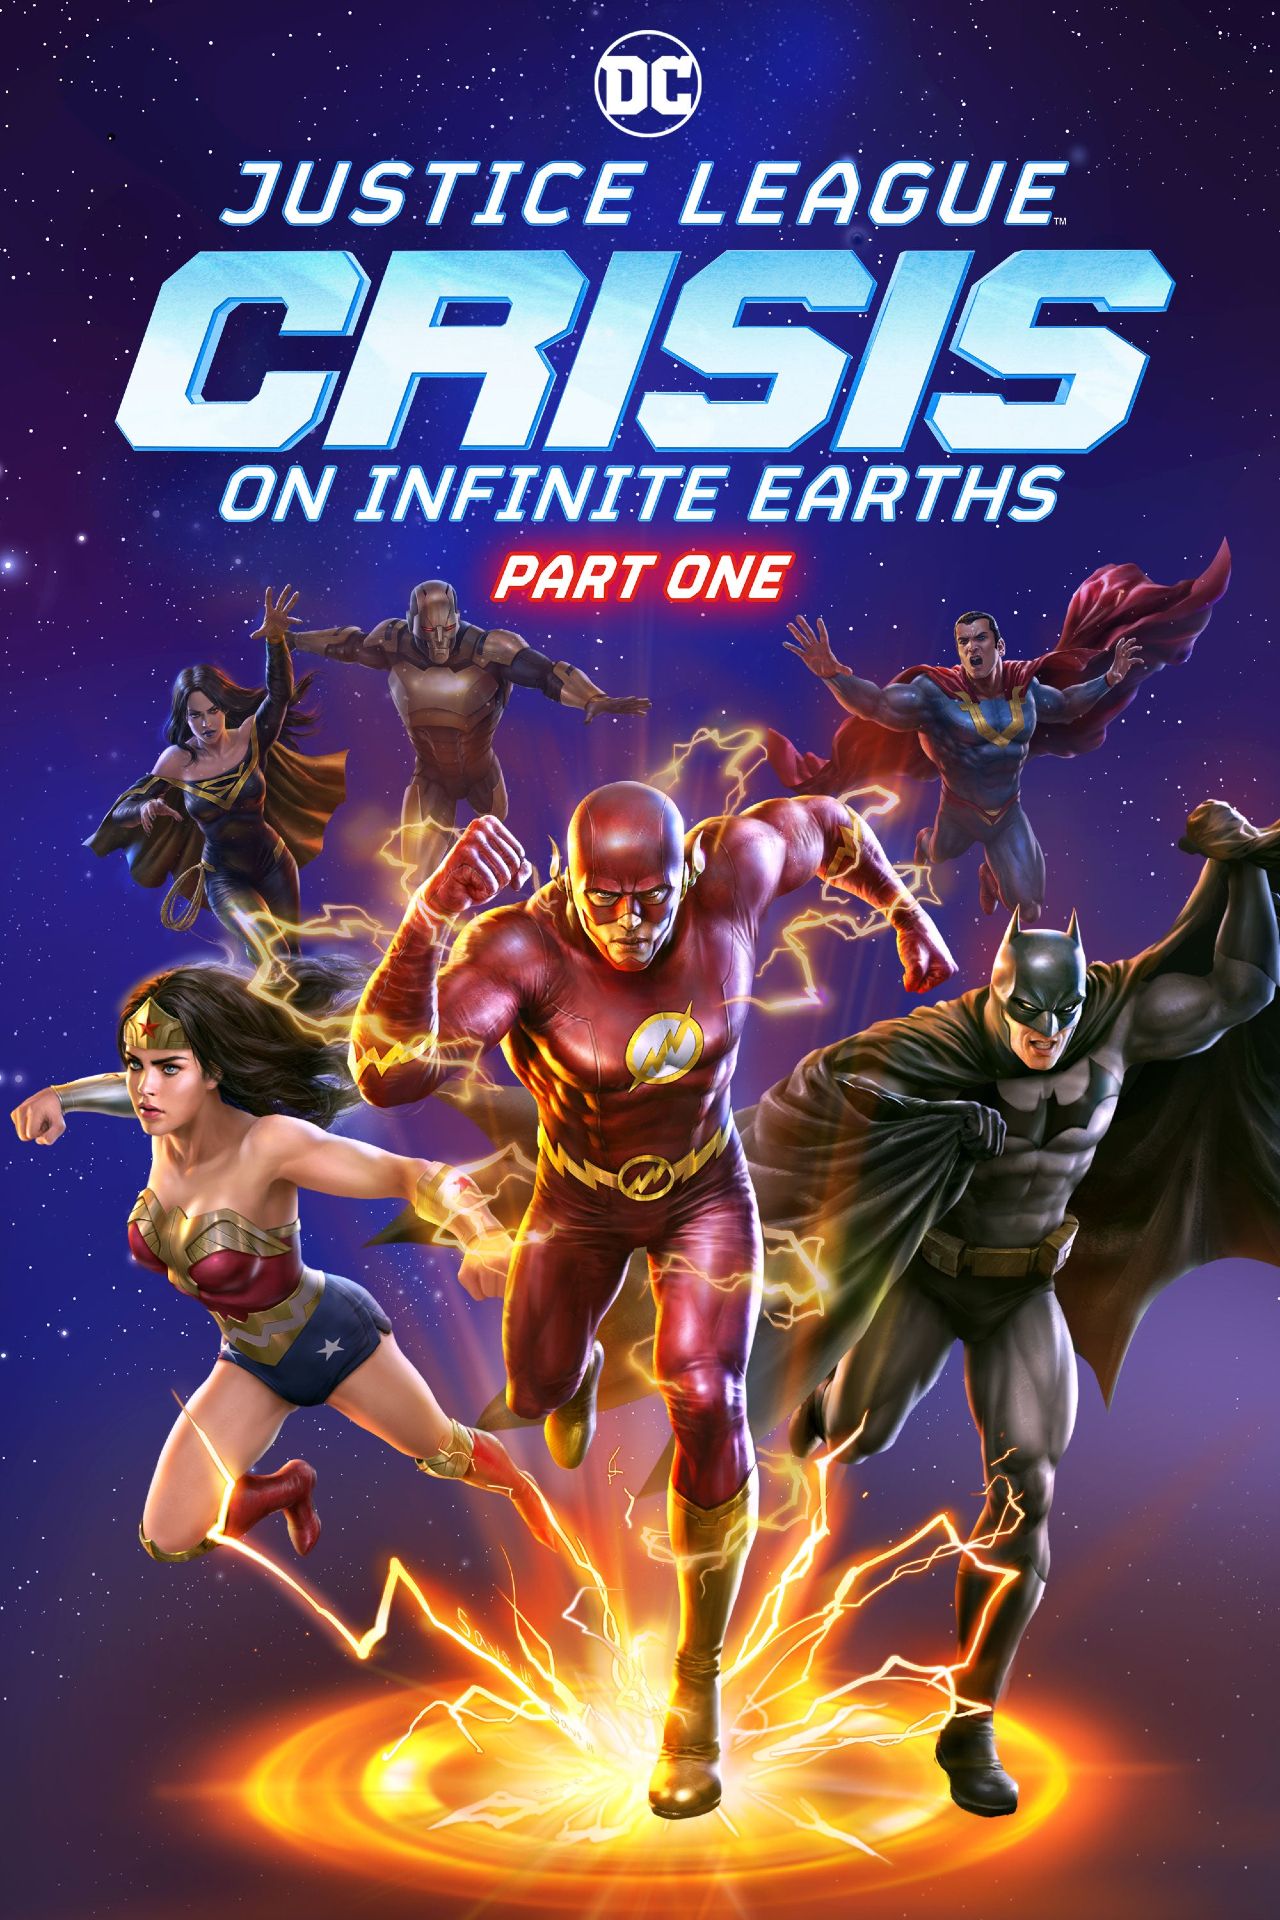 Justice League Crisis on Infinite Earths Part One Poster